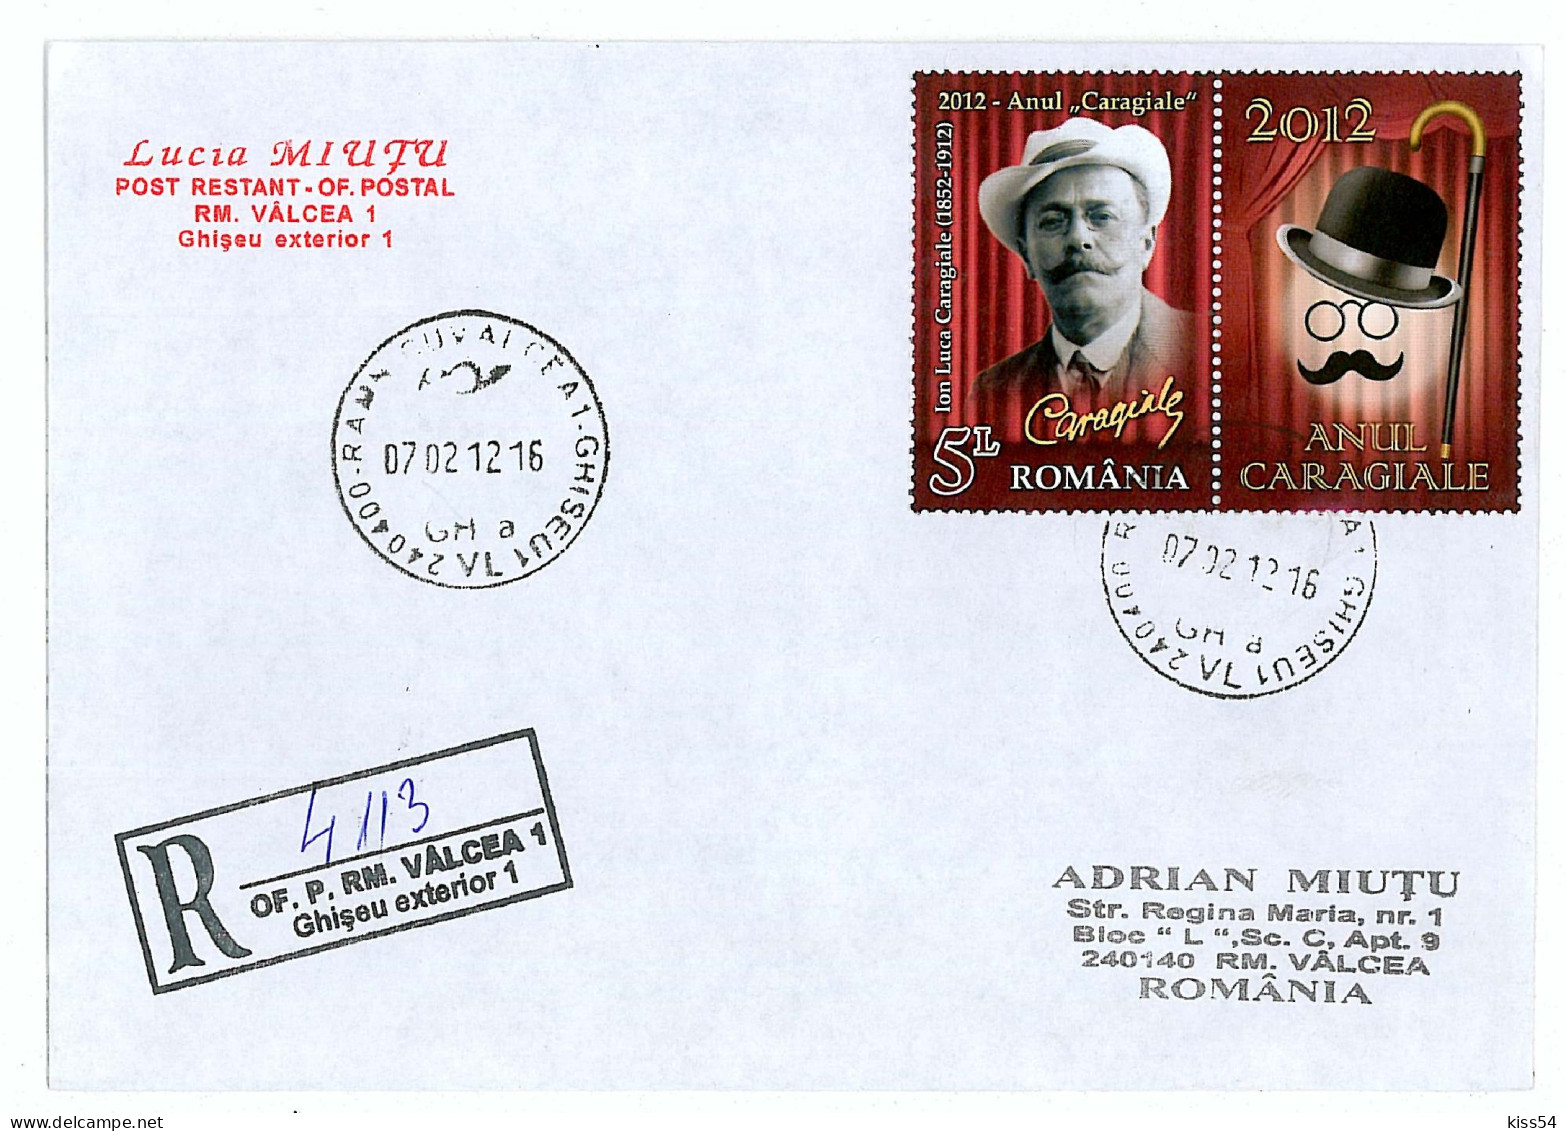 NCP 25 - 4113-a Comic THEATRE Caragiale, Romania - Registered, Stamp With Vignette - 2012 - Storia Postale